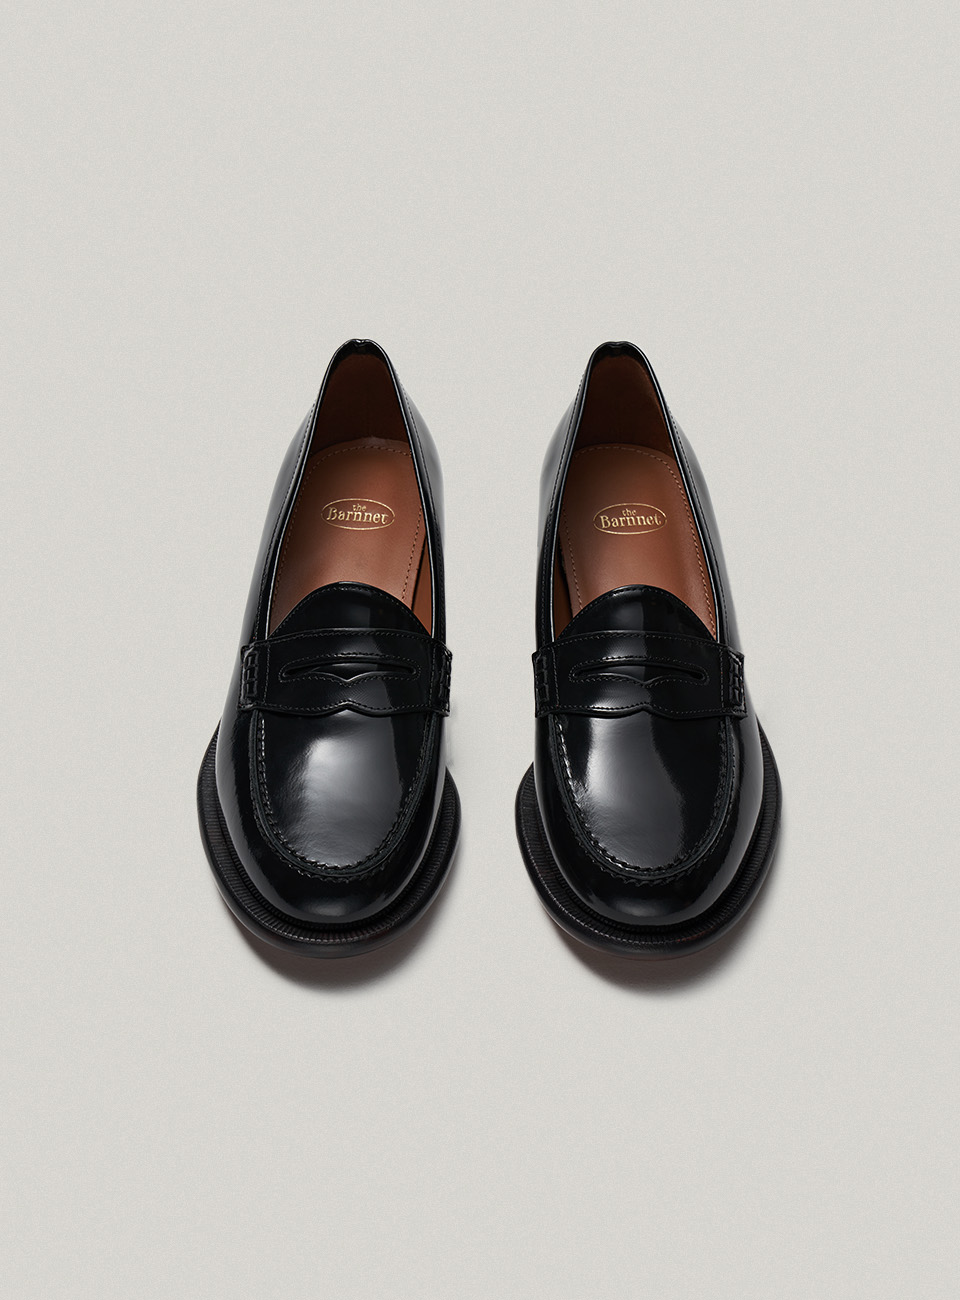 Black Box Penny Loafers